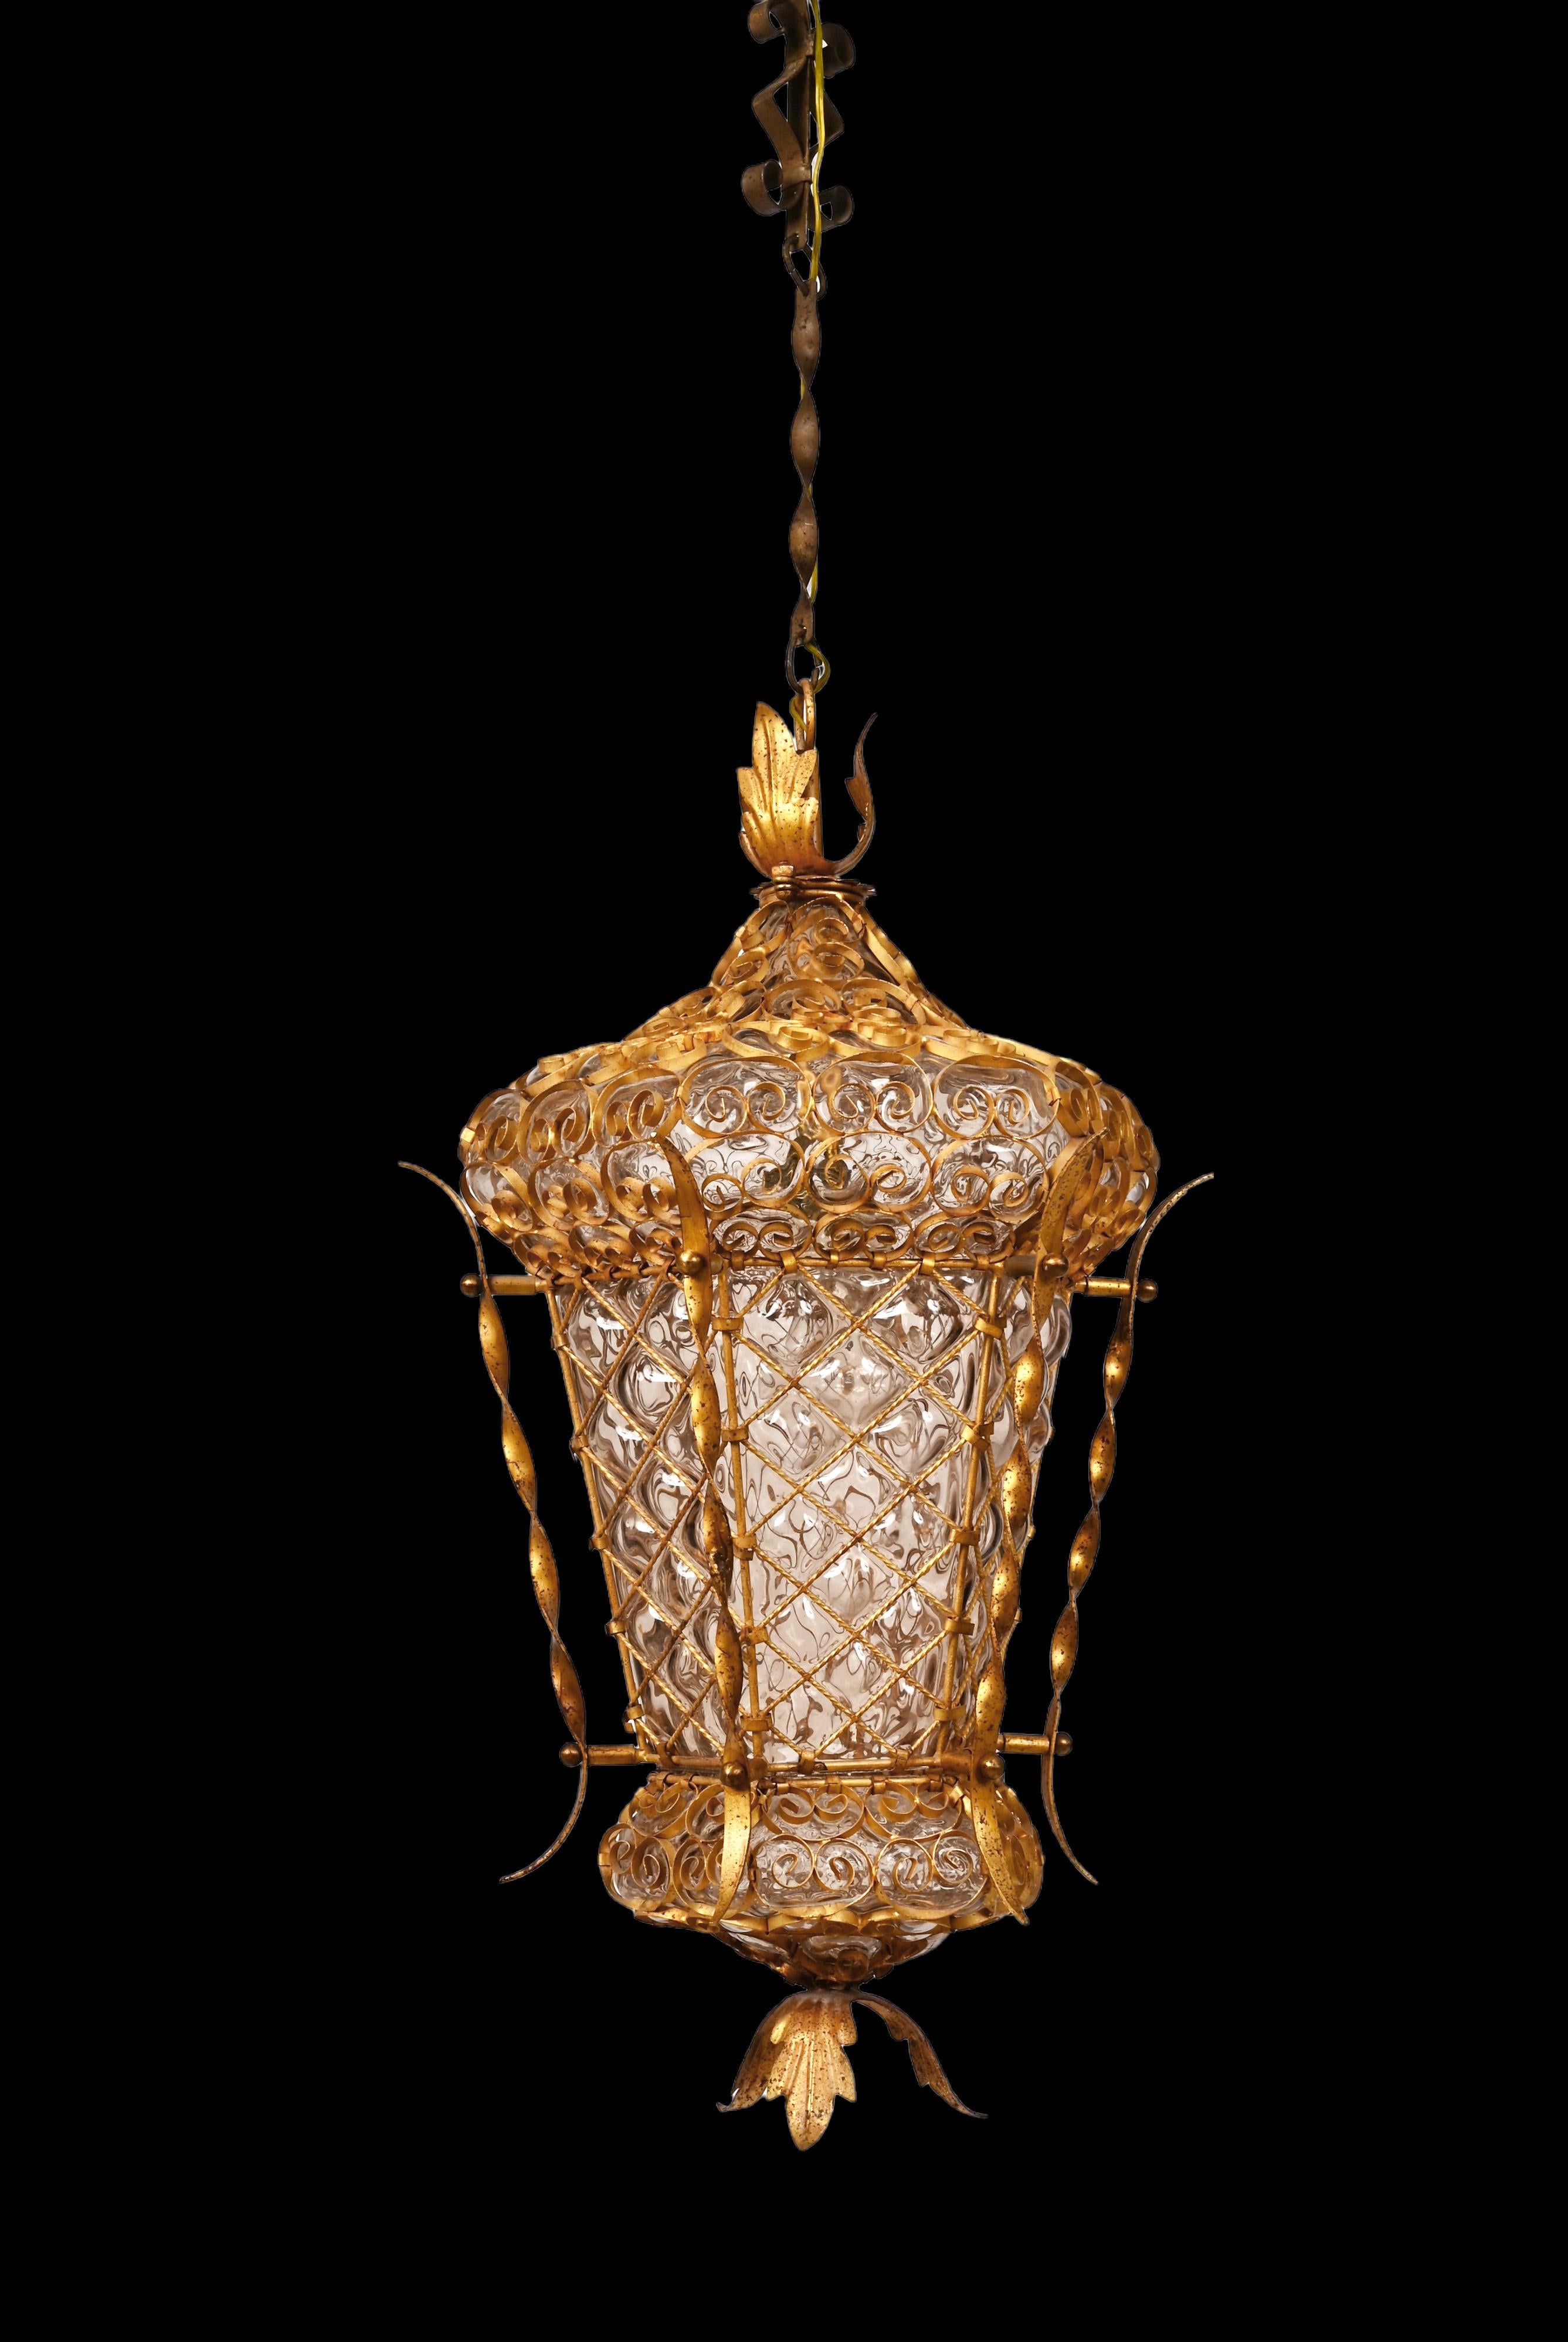 Midcentury Venetian Mouth Blown Glass in Gold Painted Metal Frame Lantern, 1940s For Sale 4